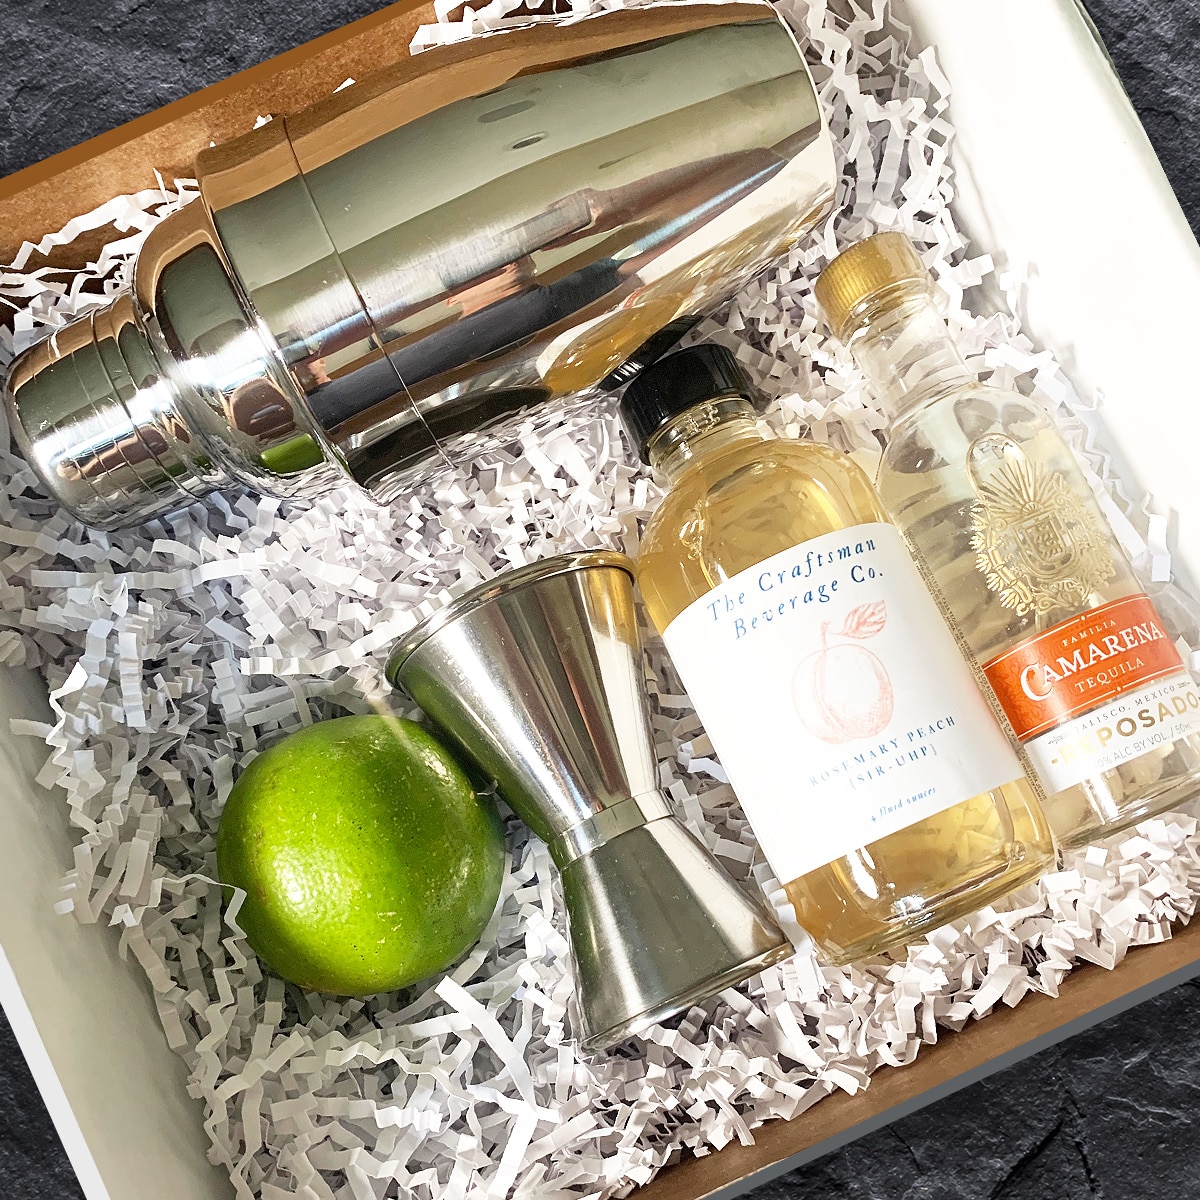 1 Cocktail Ingredients Kit - $31 (Includes Shipping)